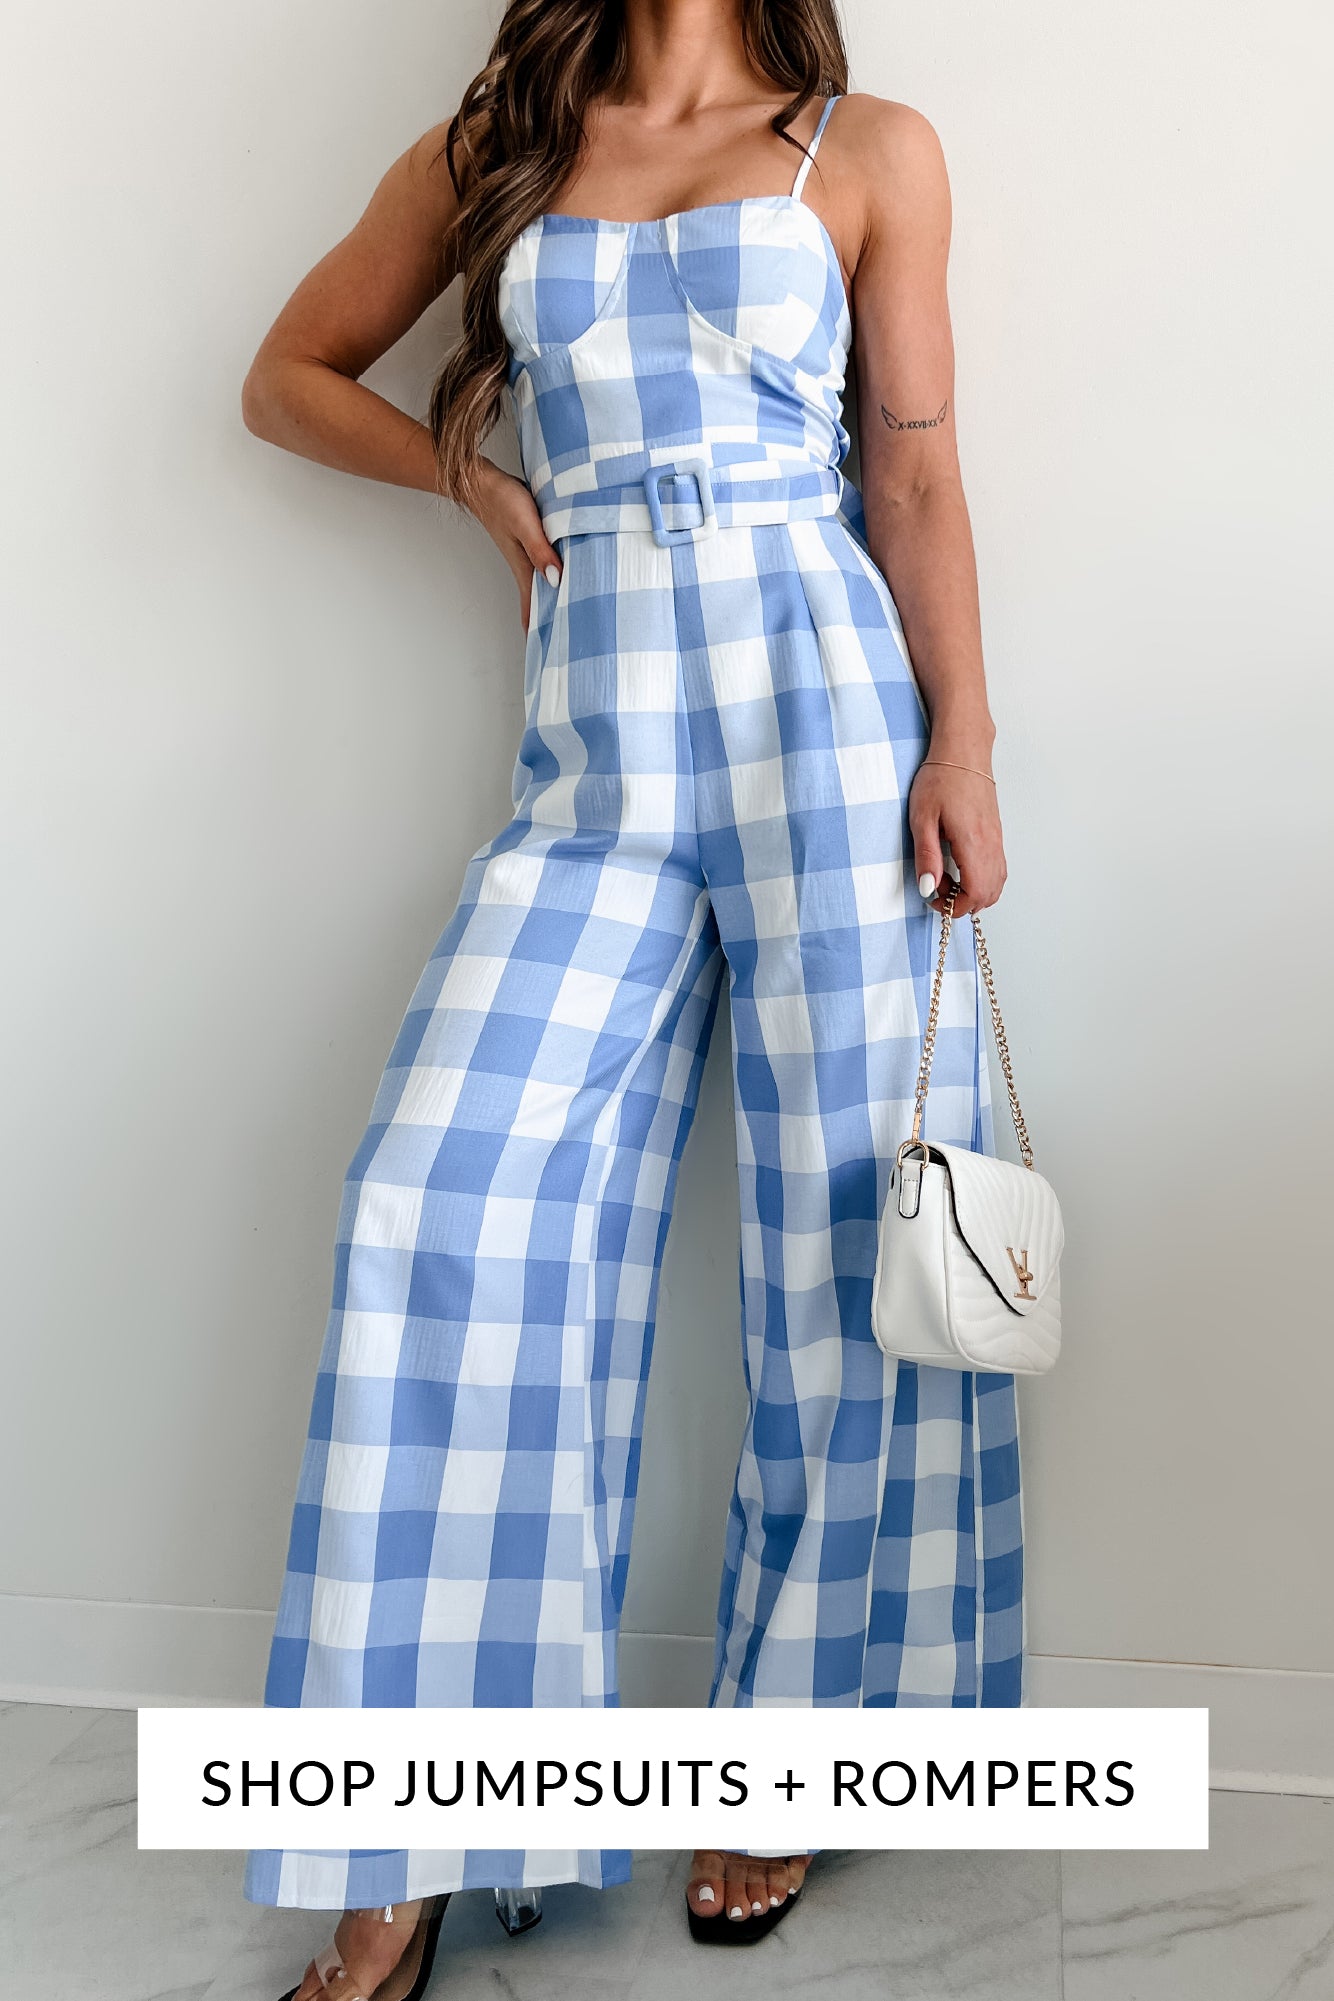 Model wearing a gingham print belted jumpsuit. Call to action says "Shops Jumpsuits + Rompers" and links to the Jumpsuits and Rompers Collection.